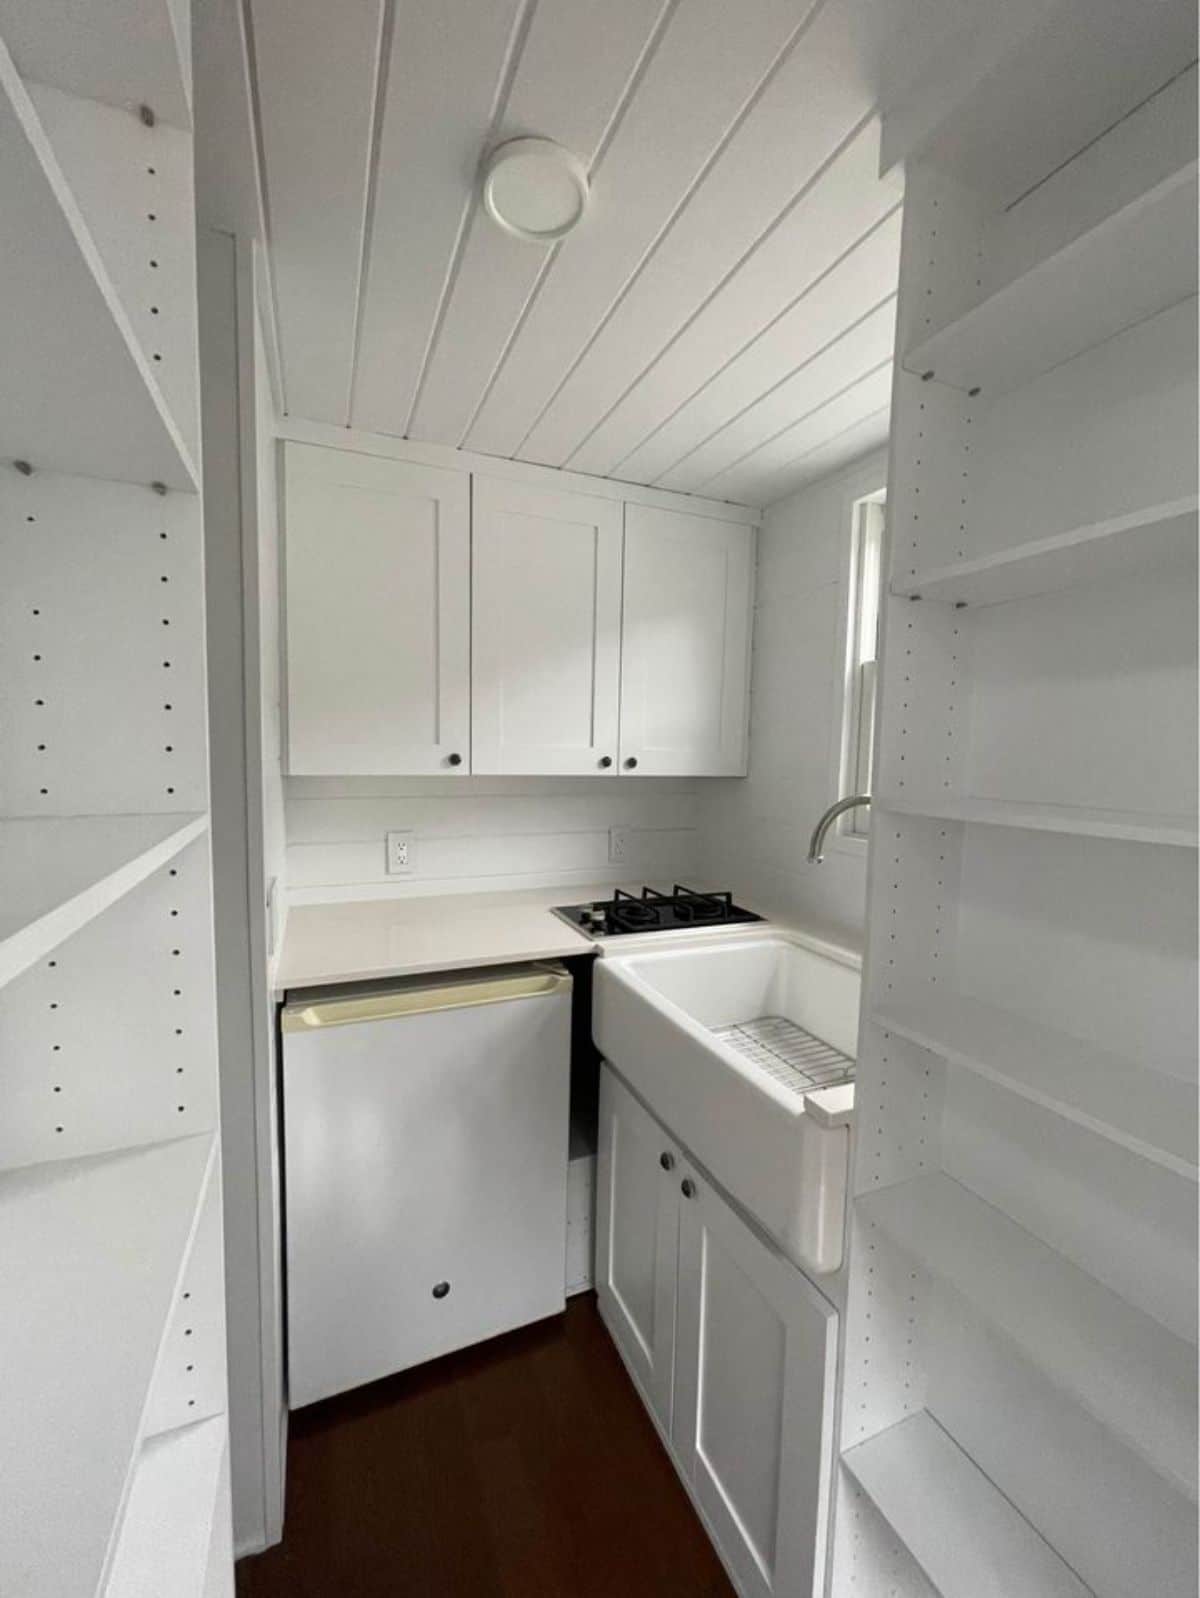 Compact kitchen of Tiny House on Wheels